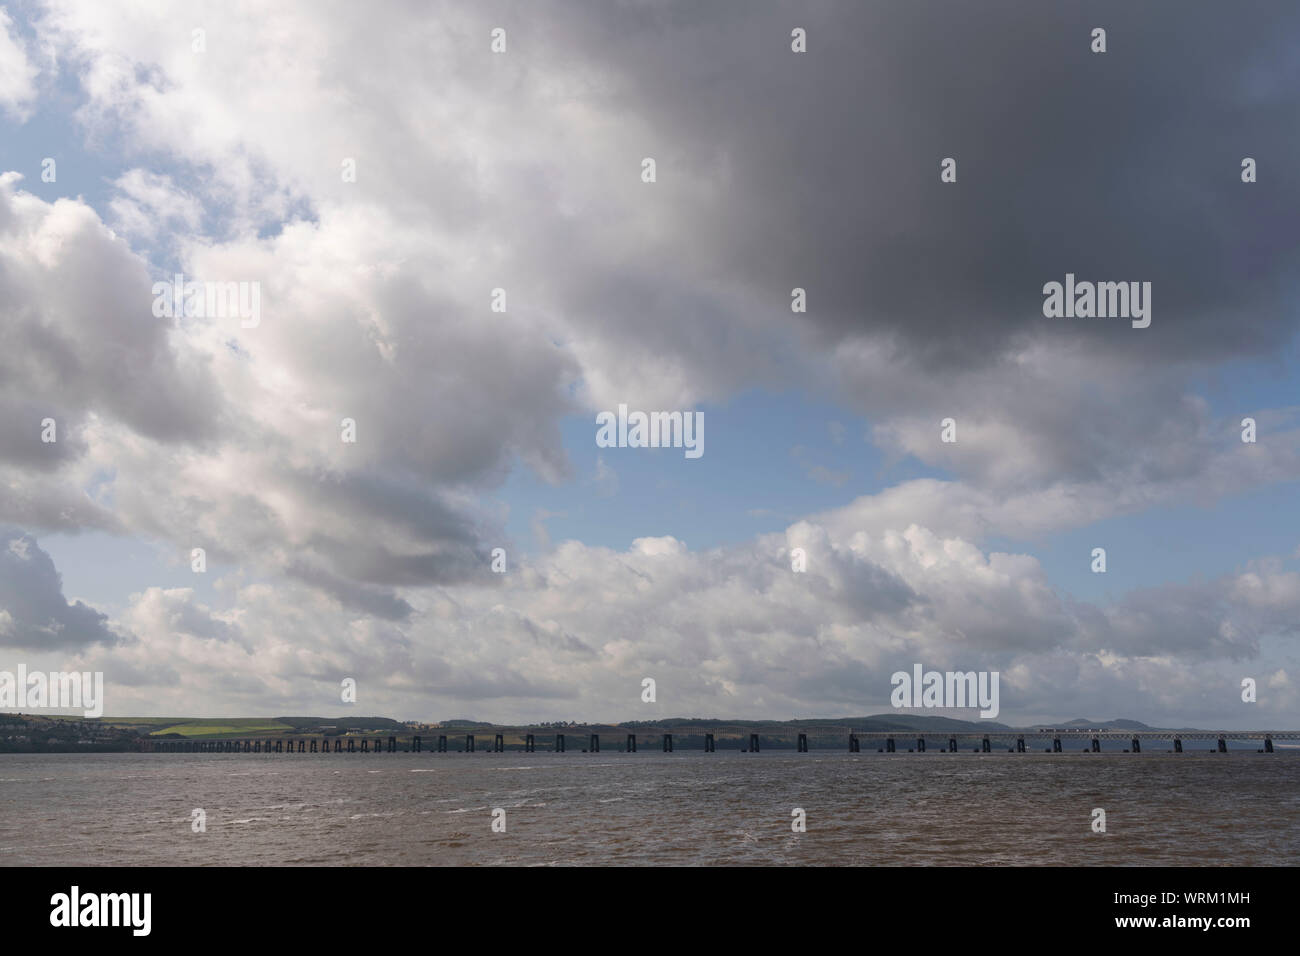 A Local Passenger Train Crosses the Firth of Tay on the Tay Railway Bridge, Seen from the Waterfront in Dundee Stock Photo